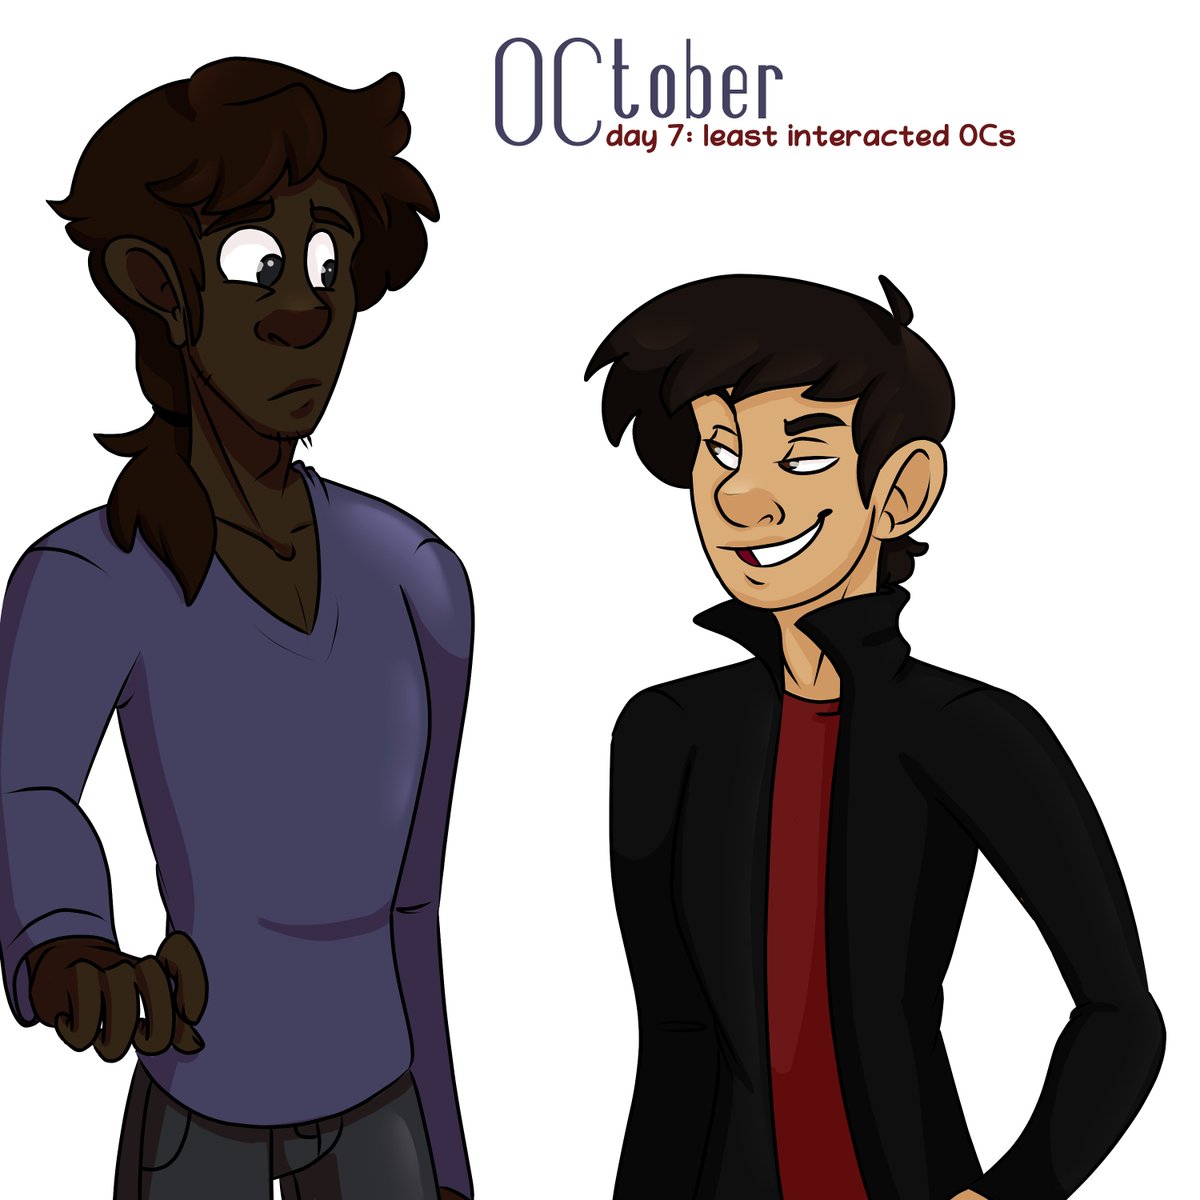 #OCtober2020 a lot of devot and my OCs are from different universes, but in our 'main' one, i'd argue that alex and bobby are two who have very infrequently interacted, never doing so at all in our canon timeline (i once suggested bobby become alex's love interest though)